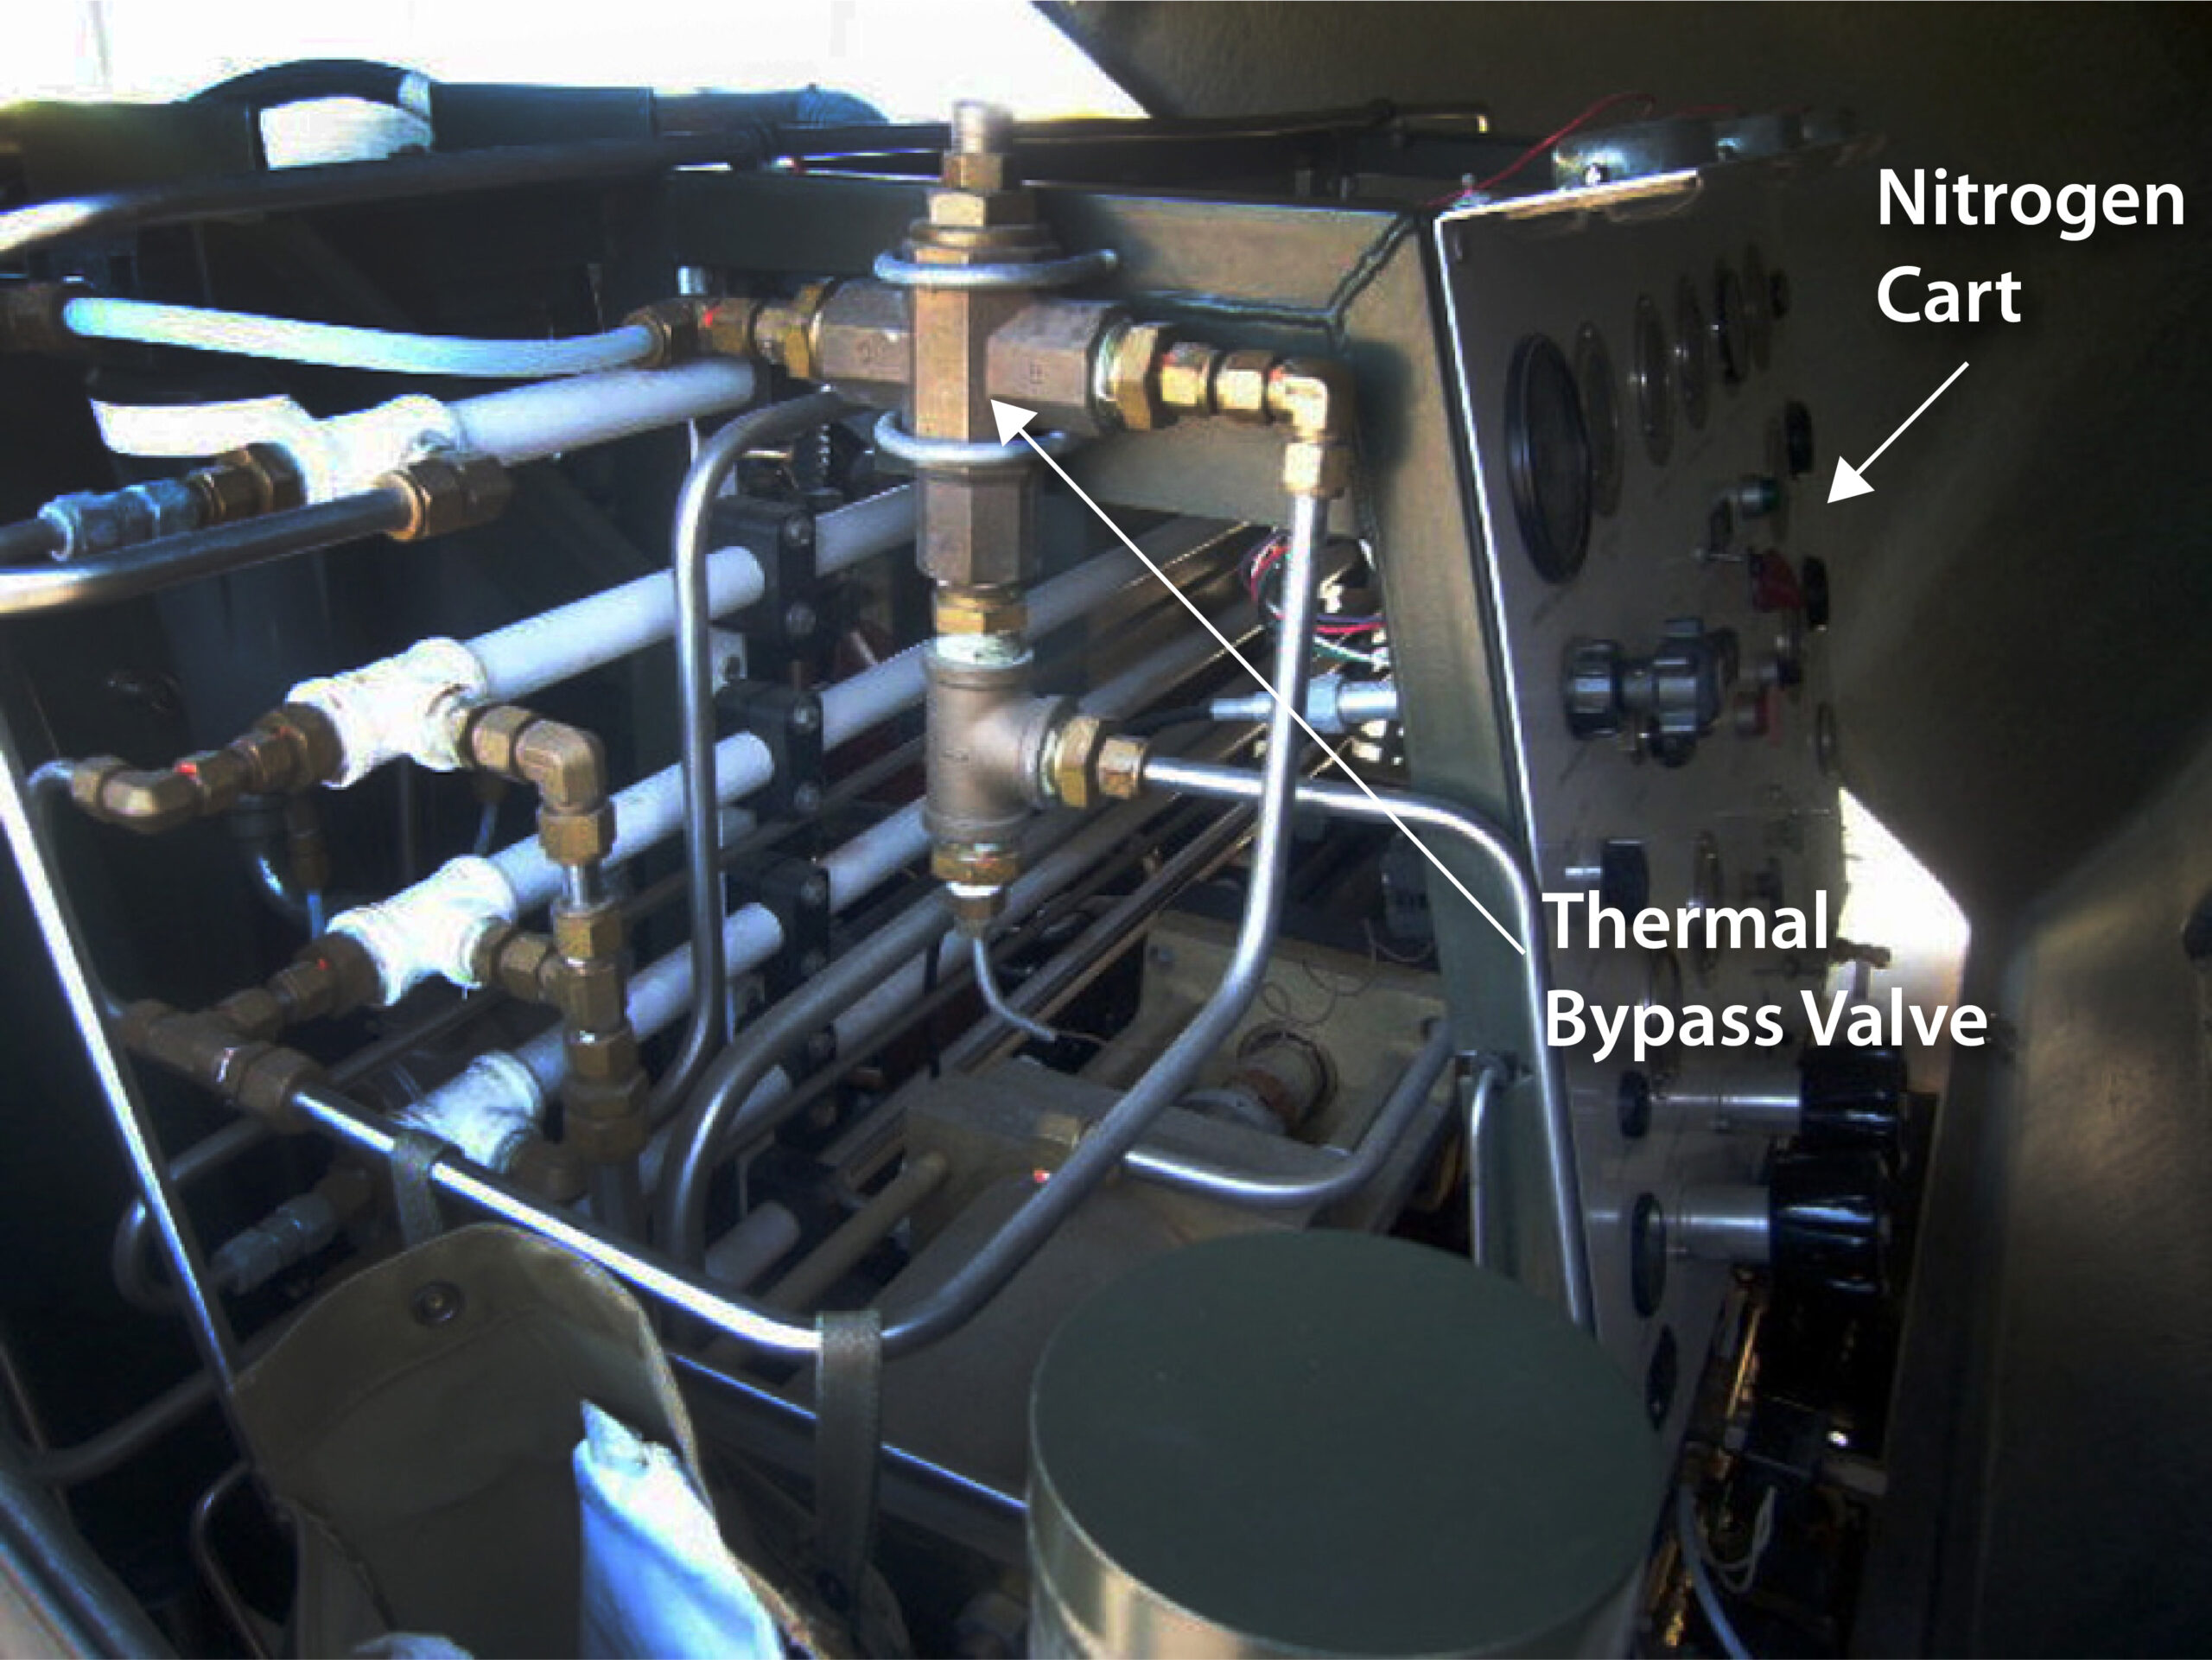 Thermal Bypass